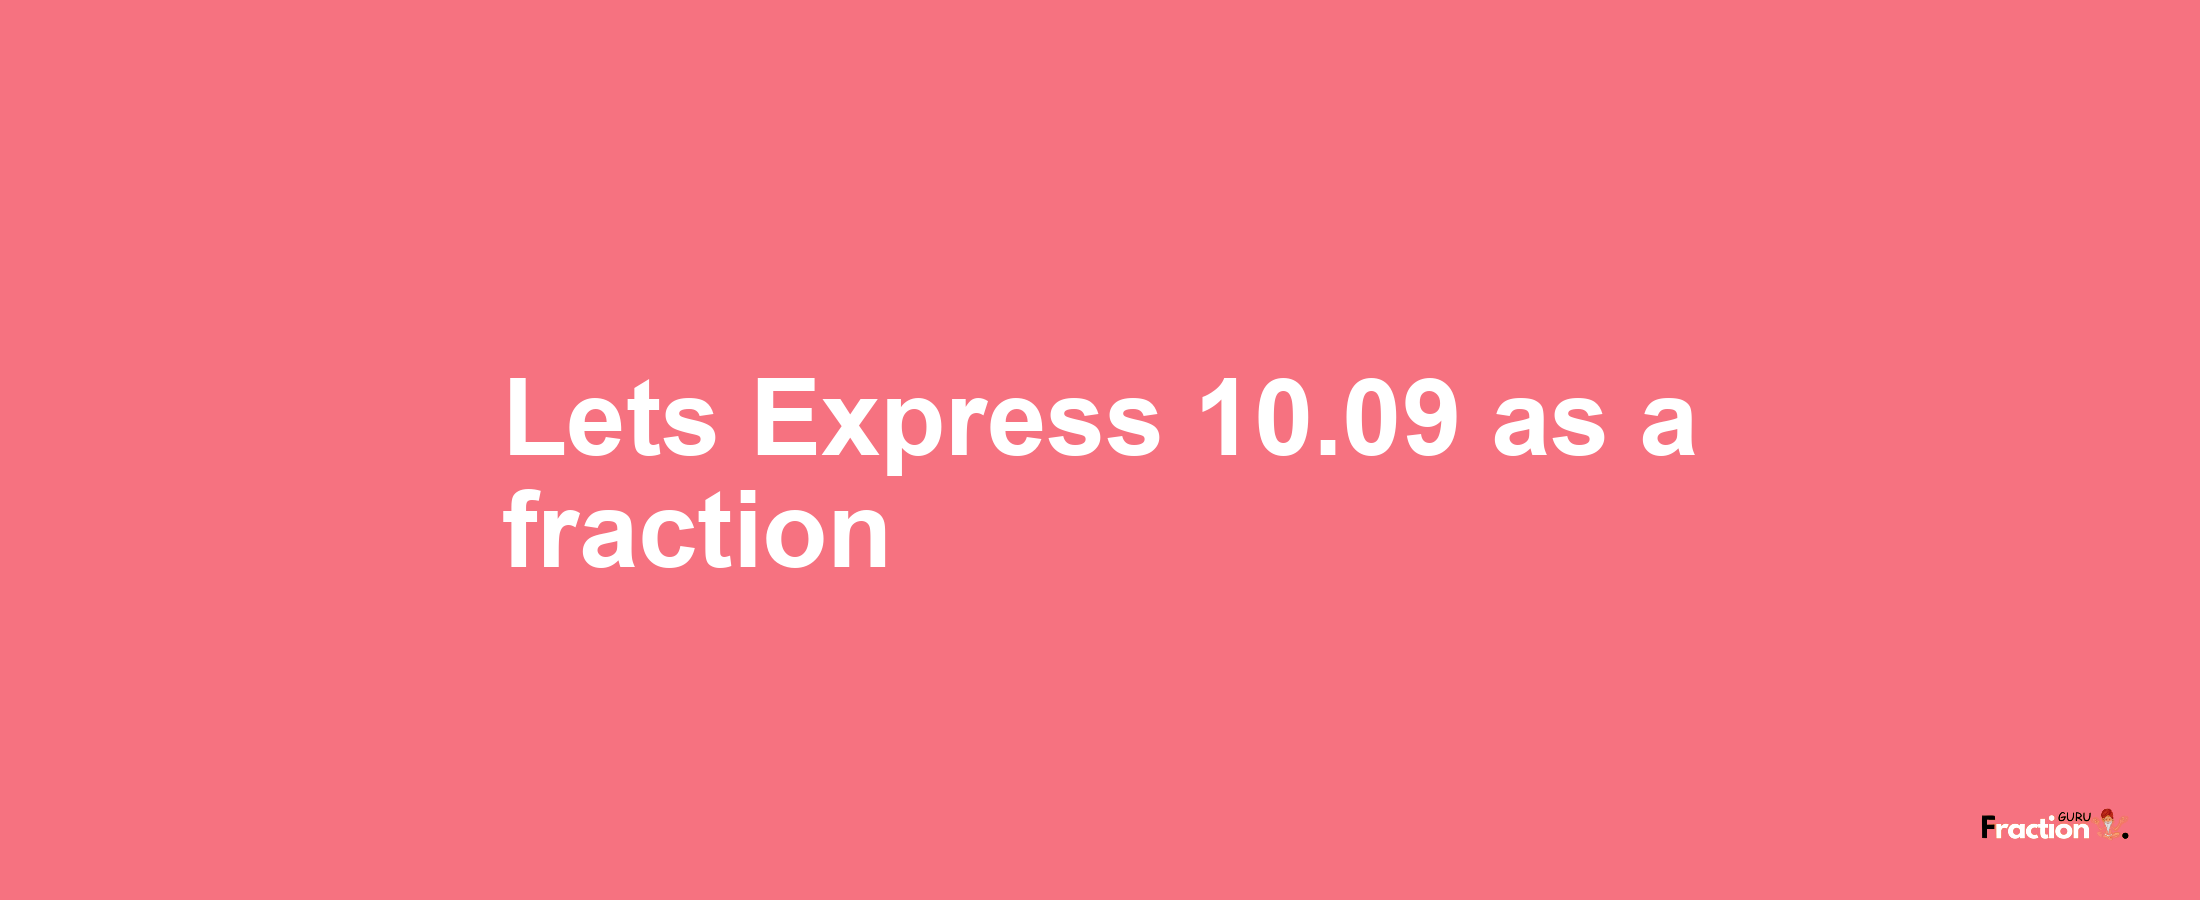 Lets Express 10.09 as afraction